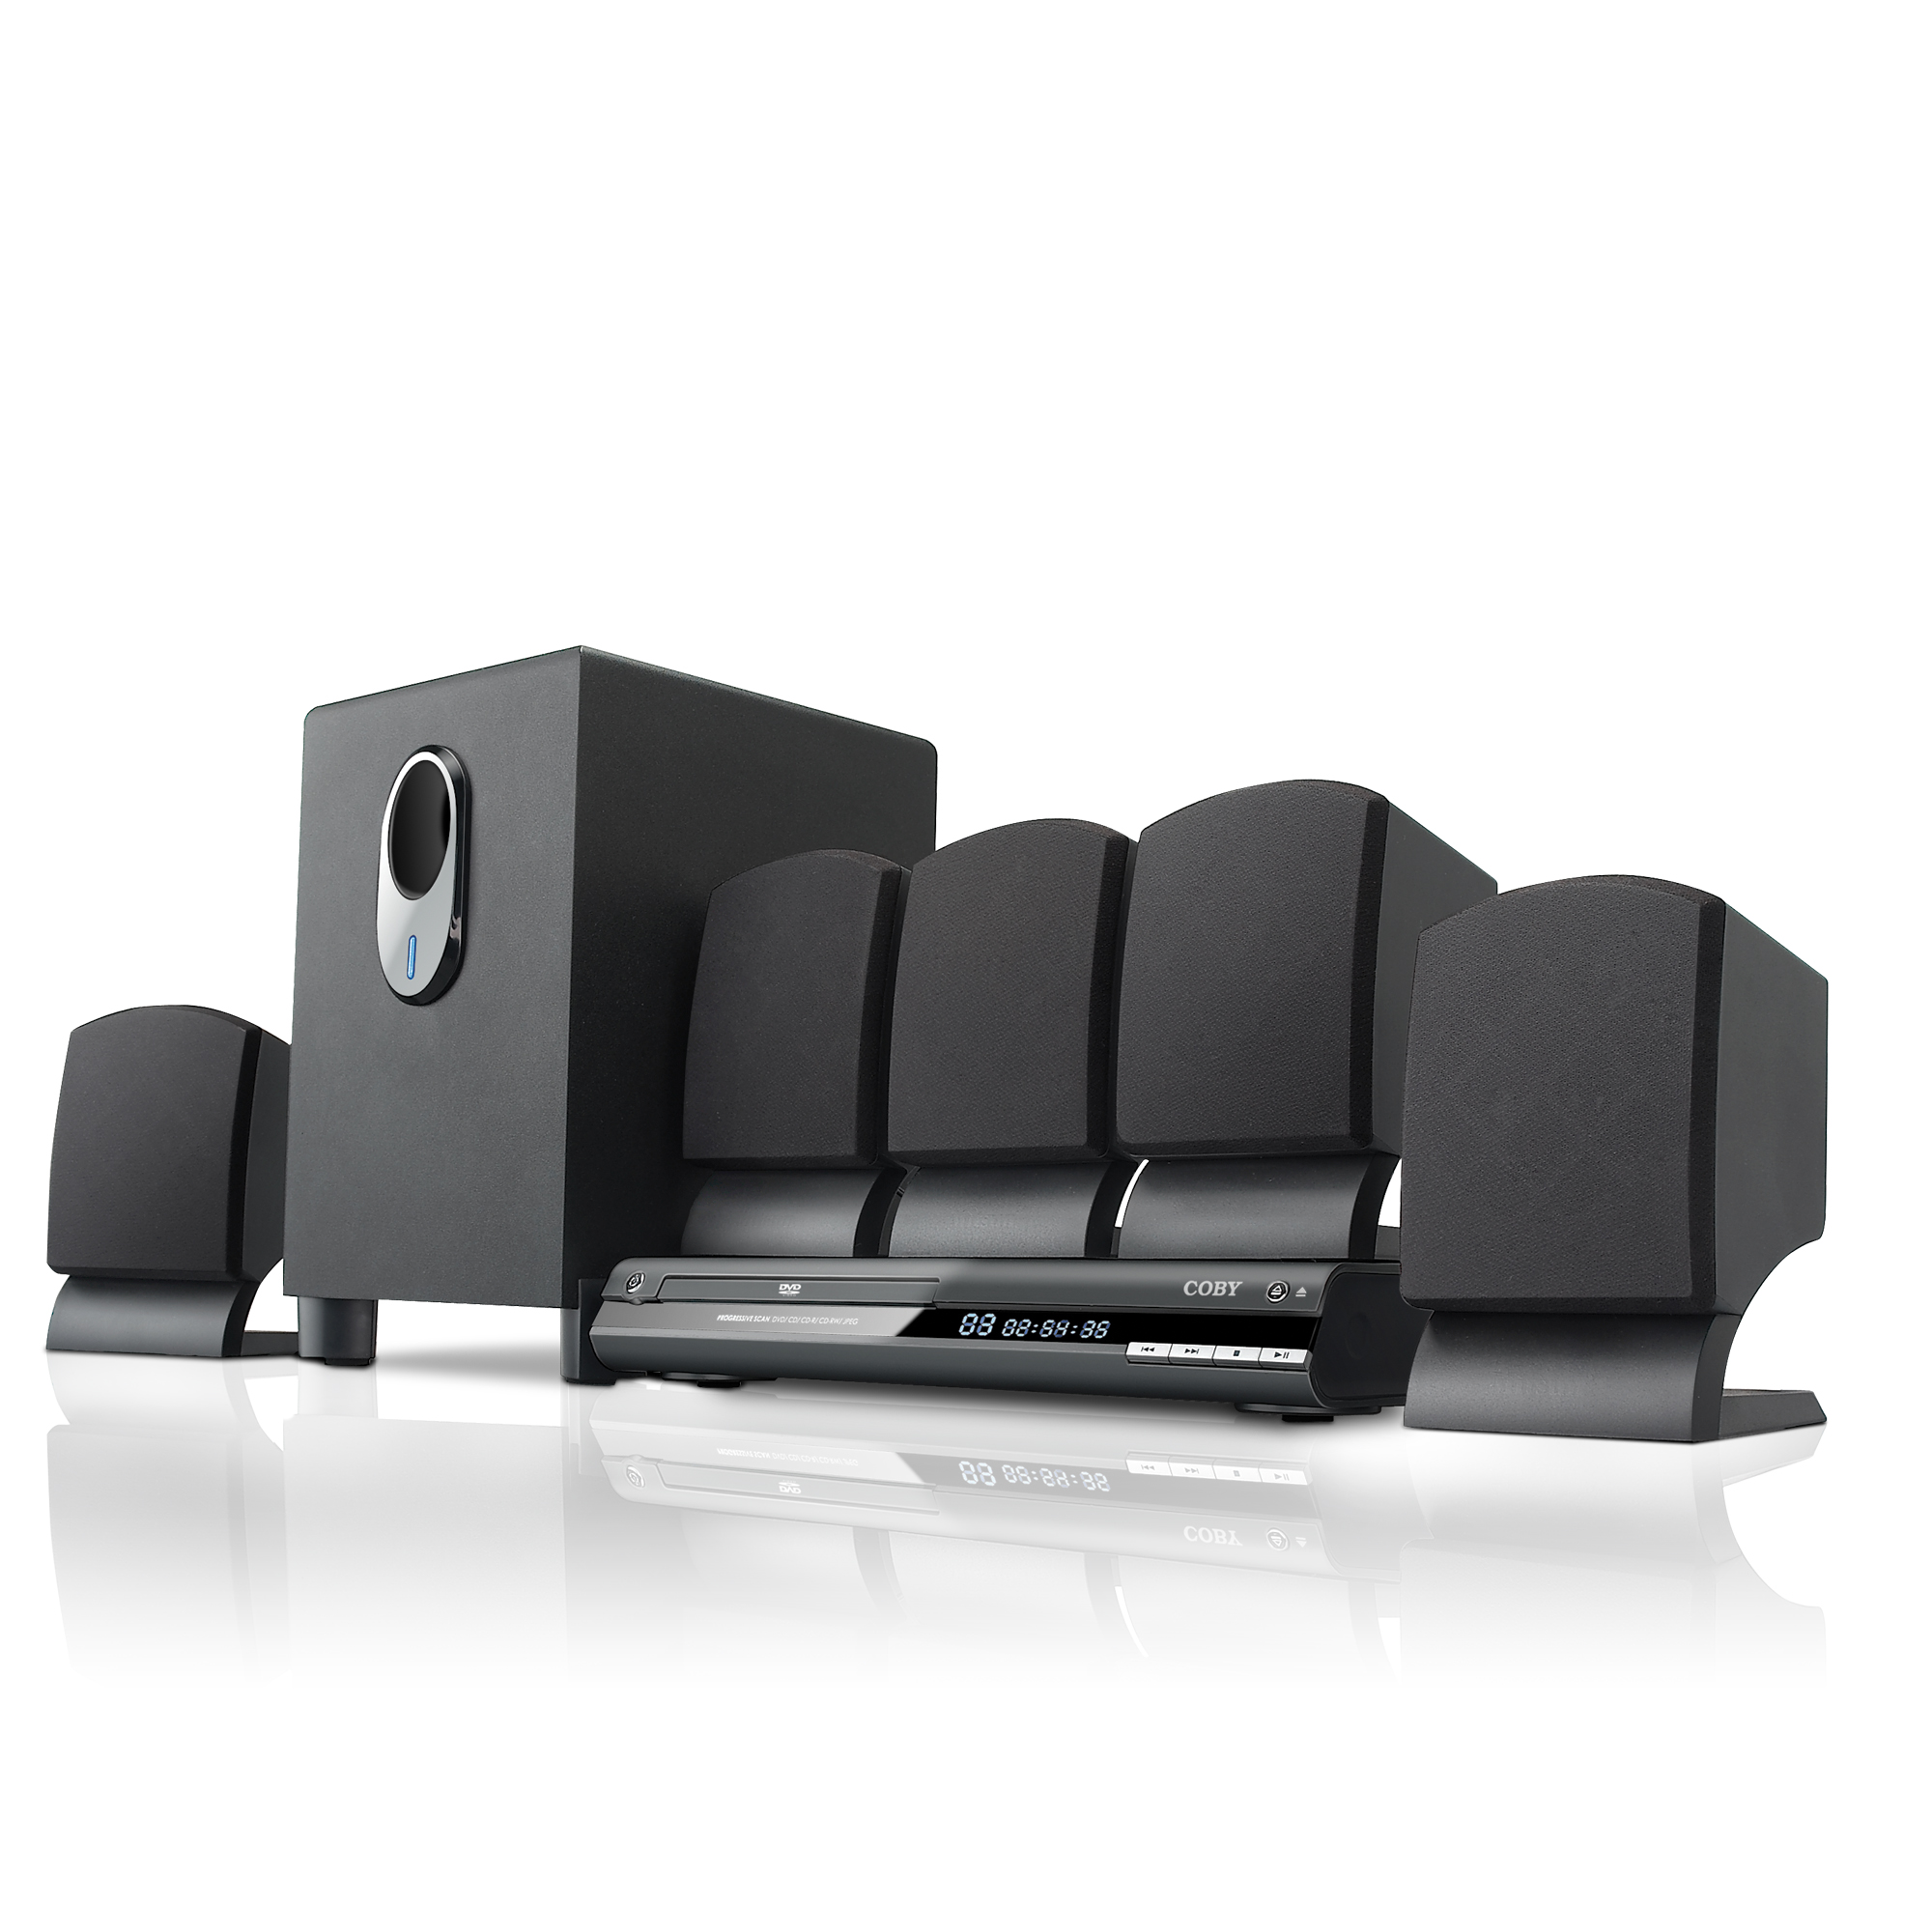 Review of Coby DVD765 5.1-Channel DVD Home Theater System